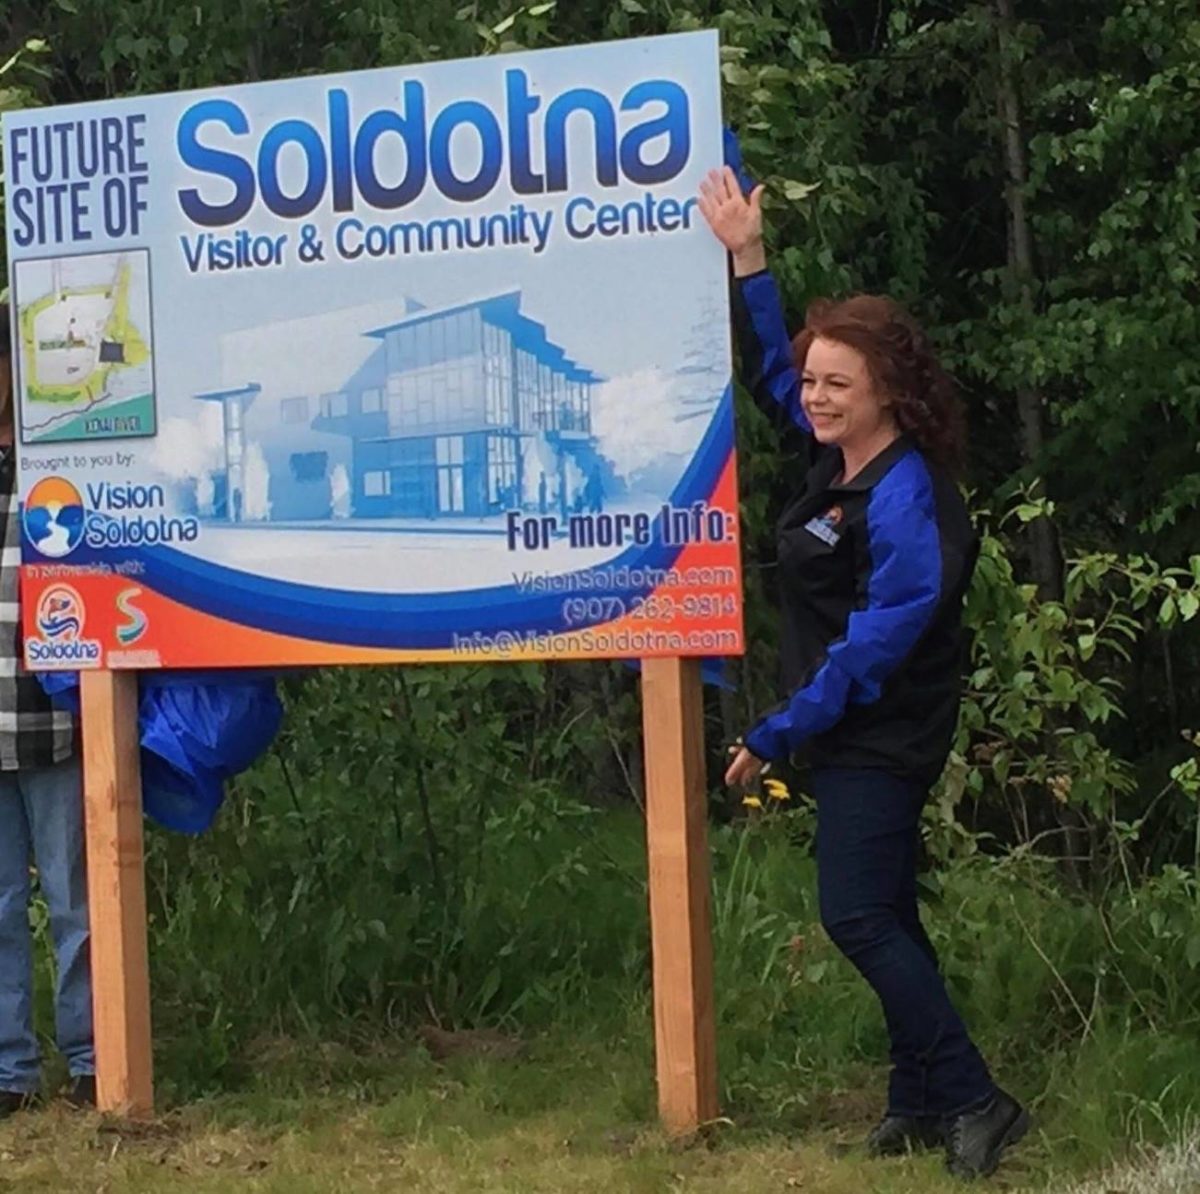 Shanon Davis, executive director of the Soldotna Chamber of Commerce, unveils a new sign indicating the future site of the proposed Soldotna visitor and community center, Wednesday, June 27 in Soldotna, Alaska. (Photo by Victoria Petersen/Peninsula Clarion)